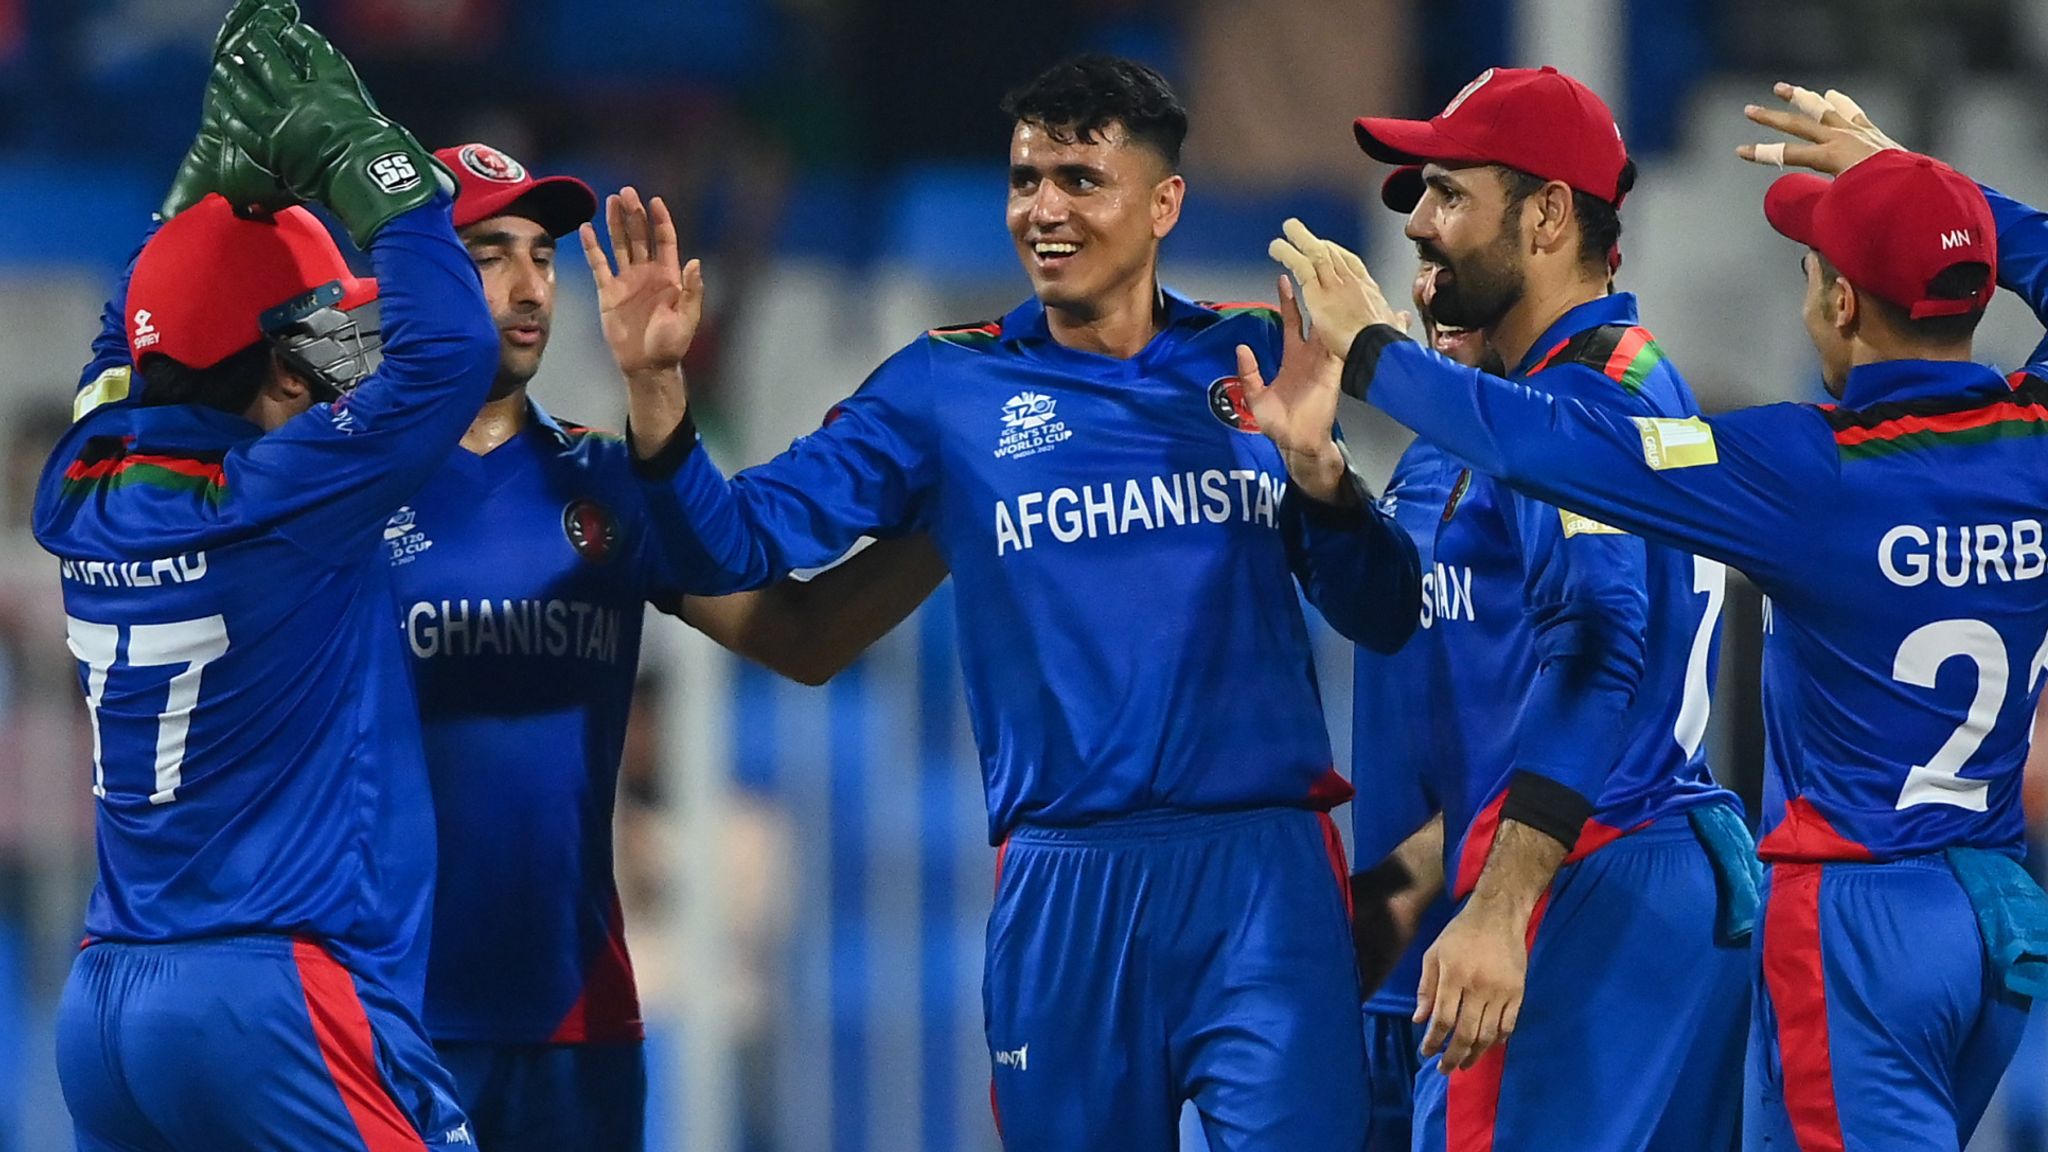 Scotland lose to Afghanistan by 130 runs in T20 World Cup, rolled for 60 as  Mujeeb Ur Rahman takes 5-20 | Cricket News | Sky Sports